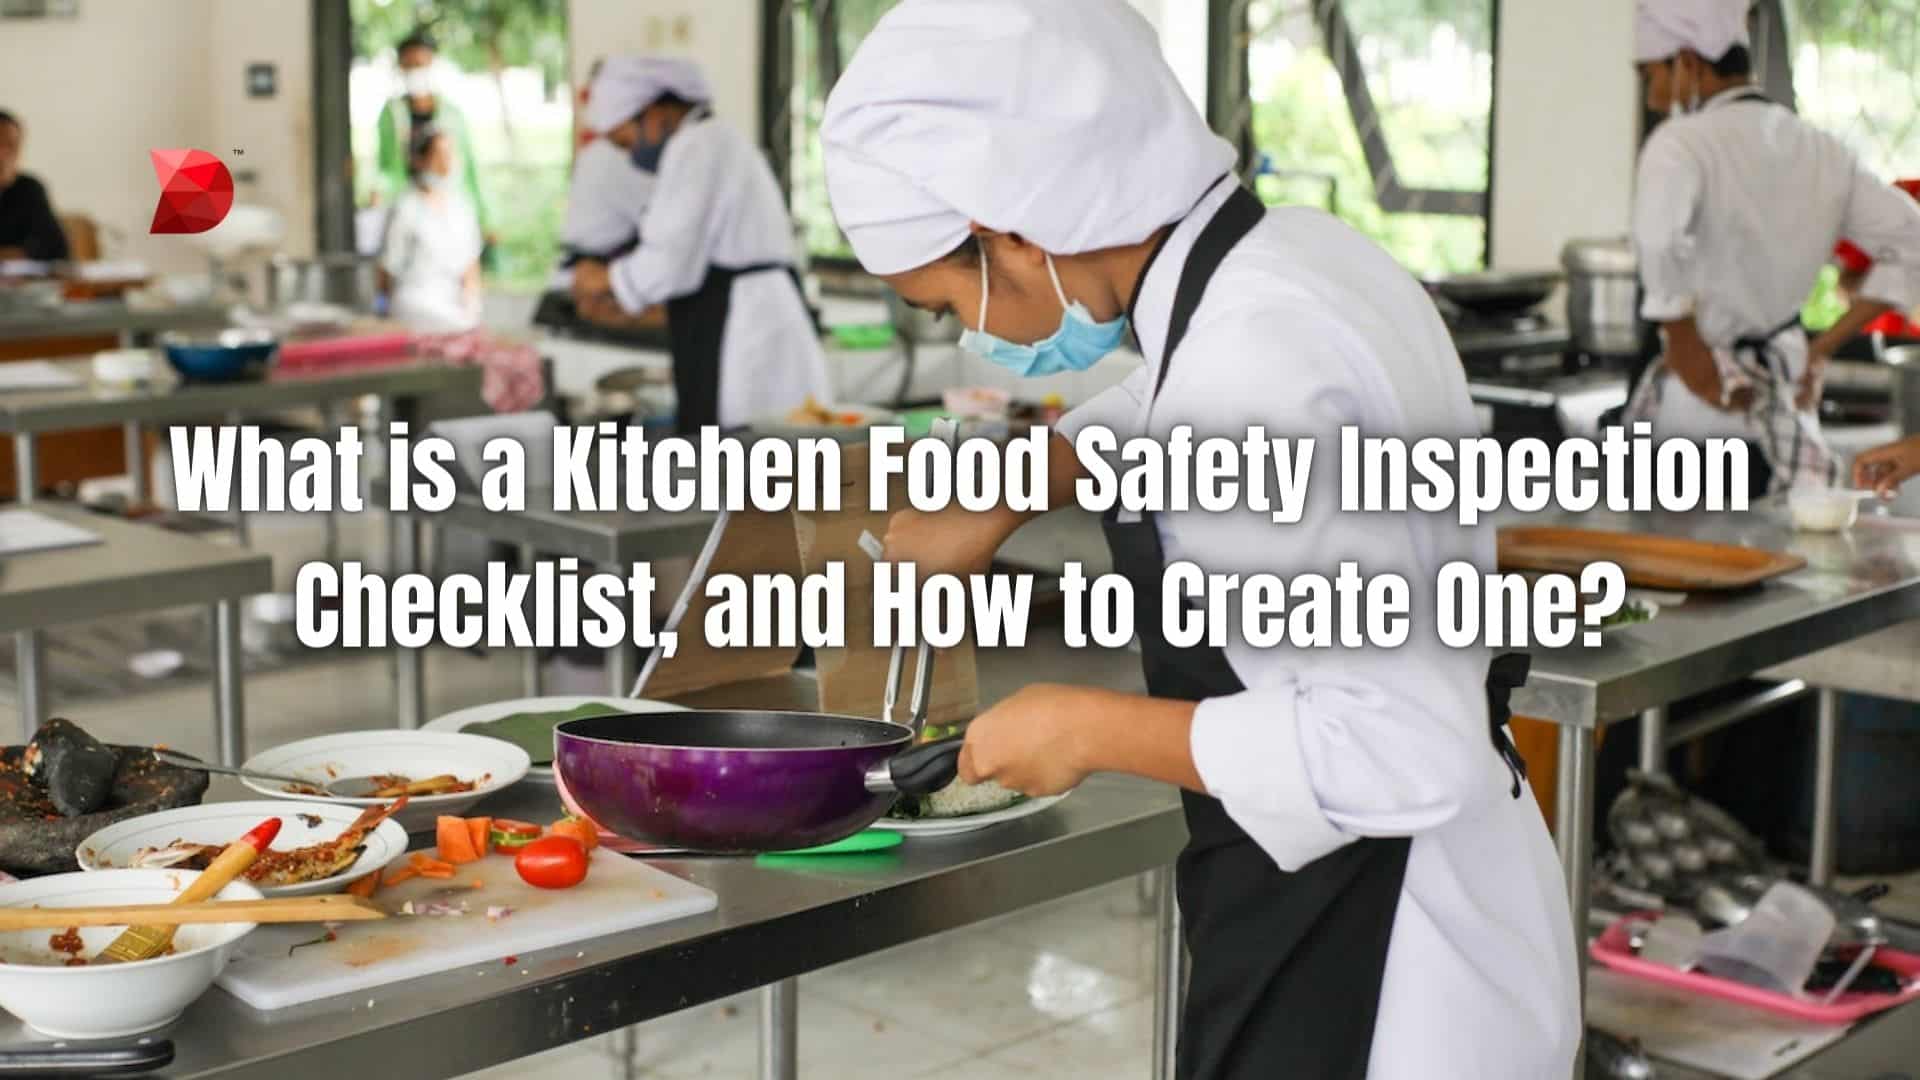 How To Create A Kitchen Food Safety